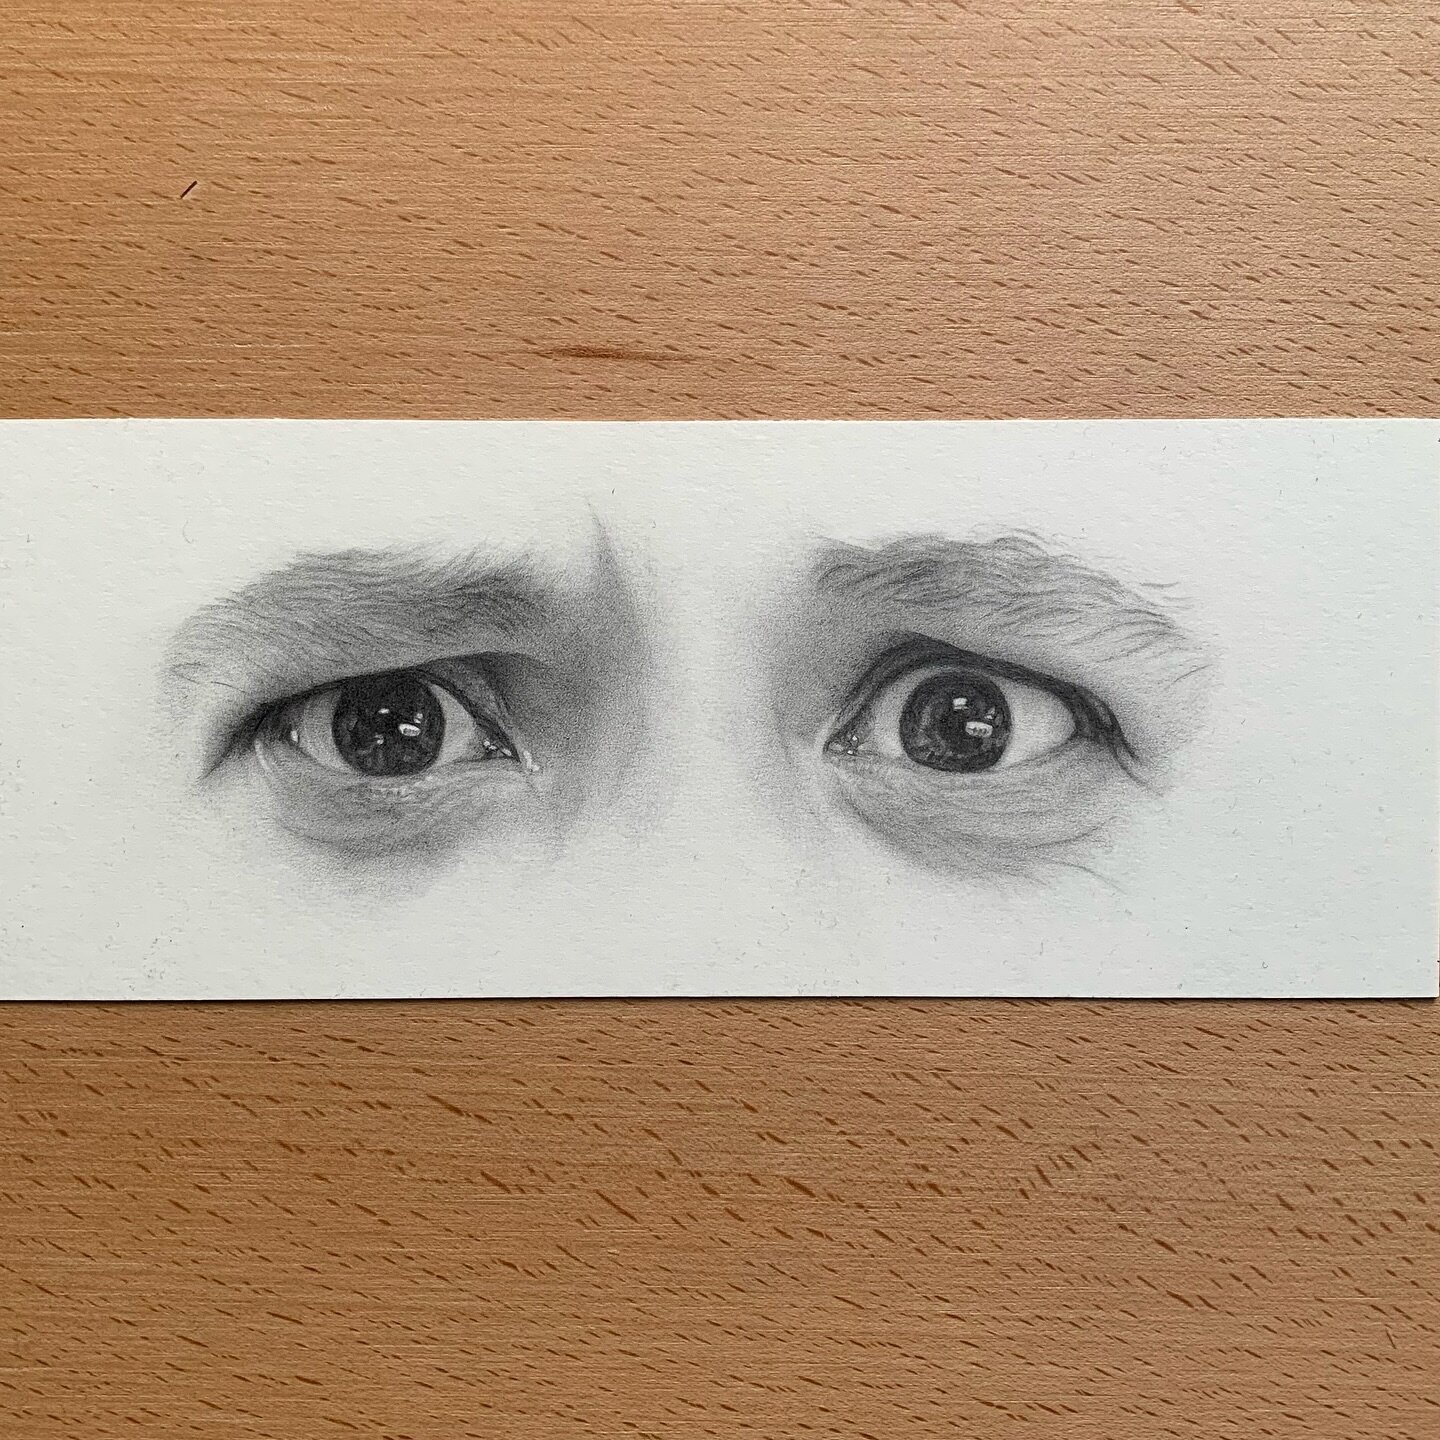 &lsquo;Just Be Yourself&rsquo;

Graphite pencil on paper 21 x 8.5cm
.
.
.
#eyesdrawing #eyesketch #eyedrawing #pencildrawing #pencilart #graphitedrawing #graphiteart #worksonpaper #pencilartist #drawing